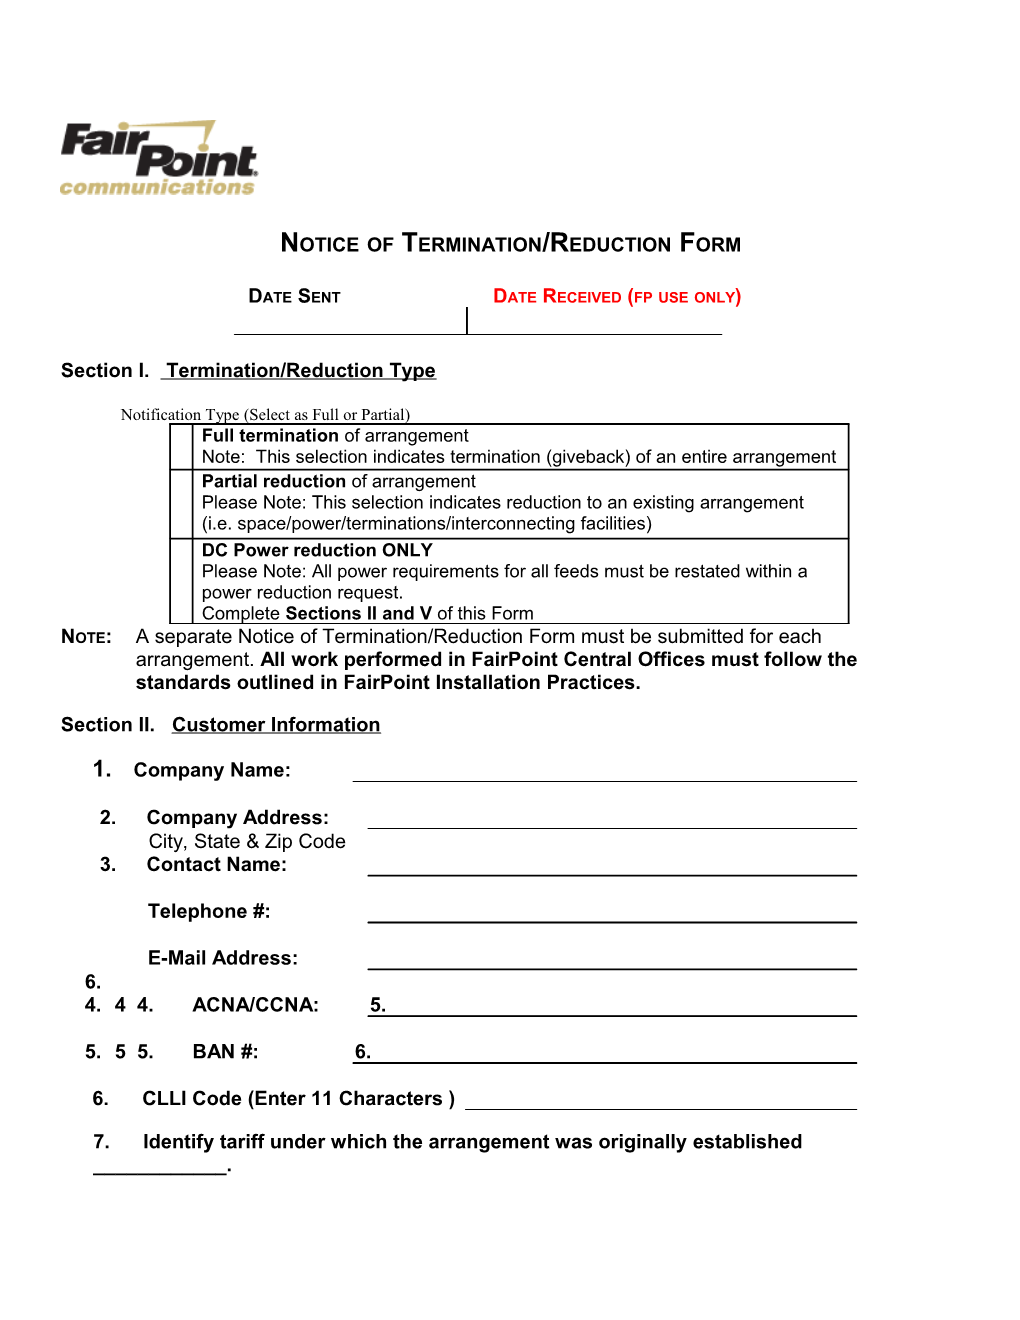 Notice of Termination/Reduction Form